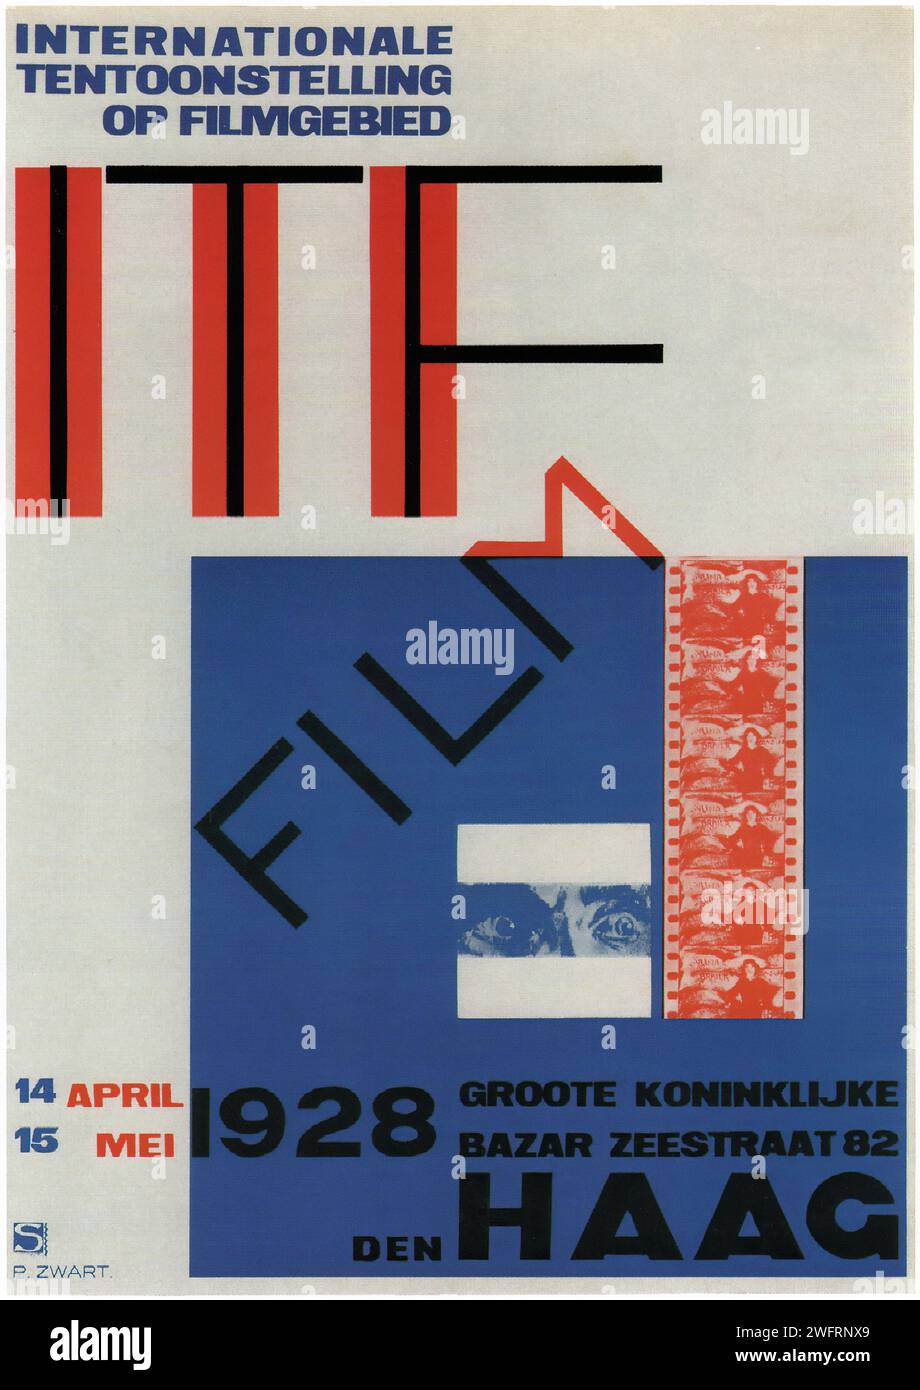 'INTERNATIONALE TENTOONSTELLING OP FILMGEBIED 14 APRIL 1928 DEN HAAG' which translates to 'INTERNATIONAL EXHIBITION IN THE FIELD OF FILM APRIL 14, 1928 THE HAGUE.' Vintage Dutch Advertising poster with a geometric and typographic design in red, white, and blue, representing the modernist movement in graphic design. Stock Photo